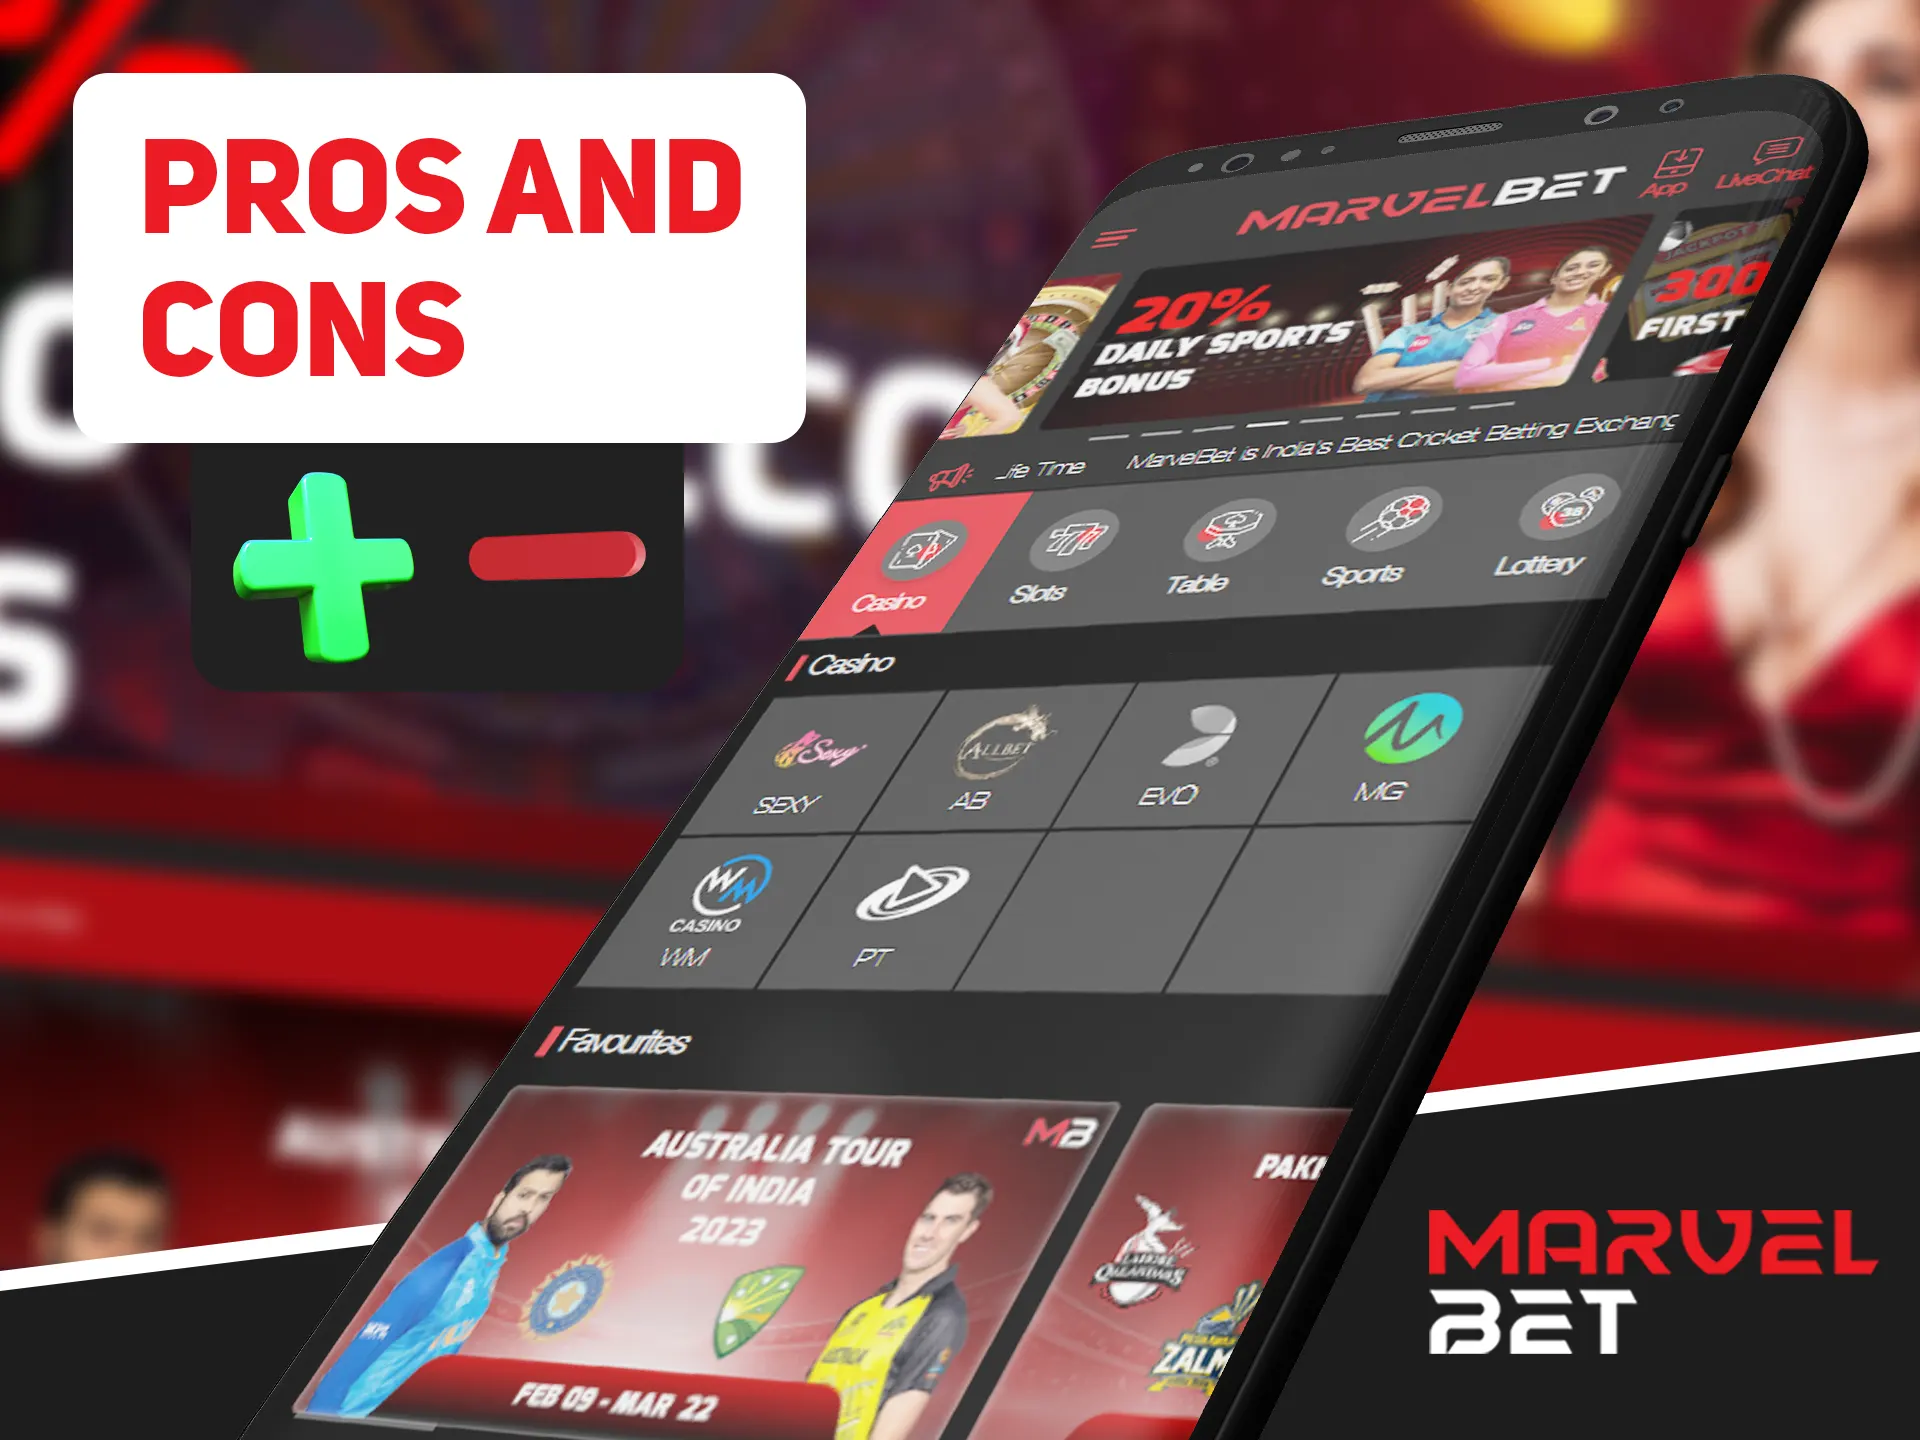 Learn more about best features of Marvelbet app.